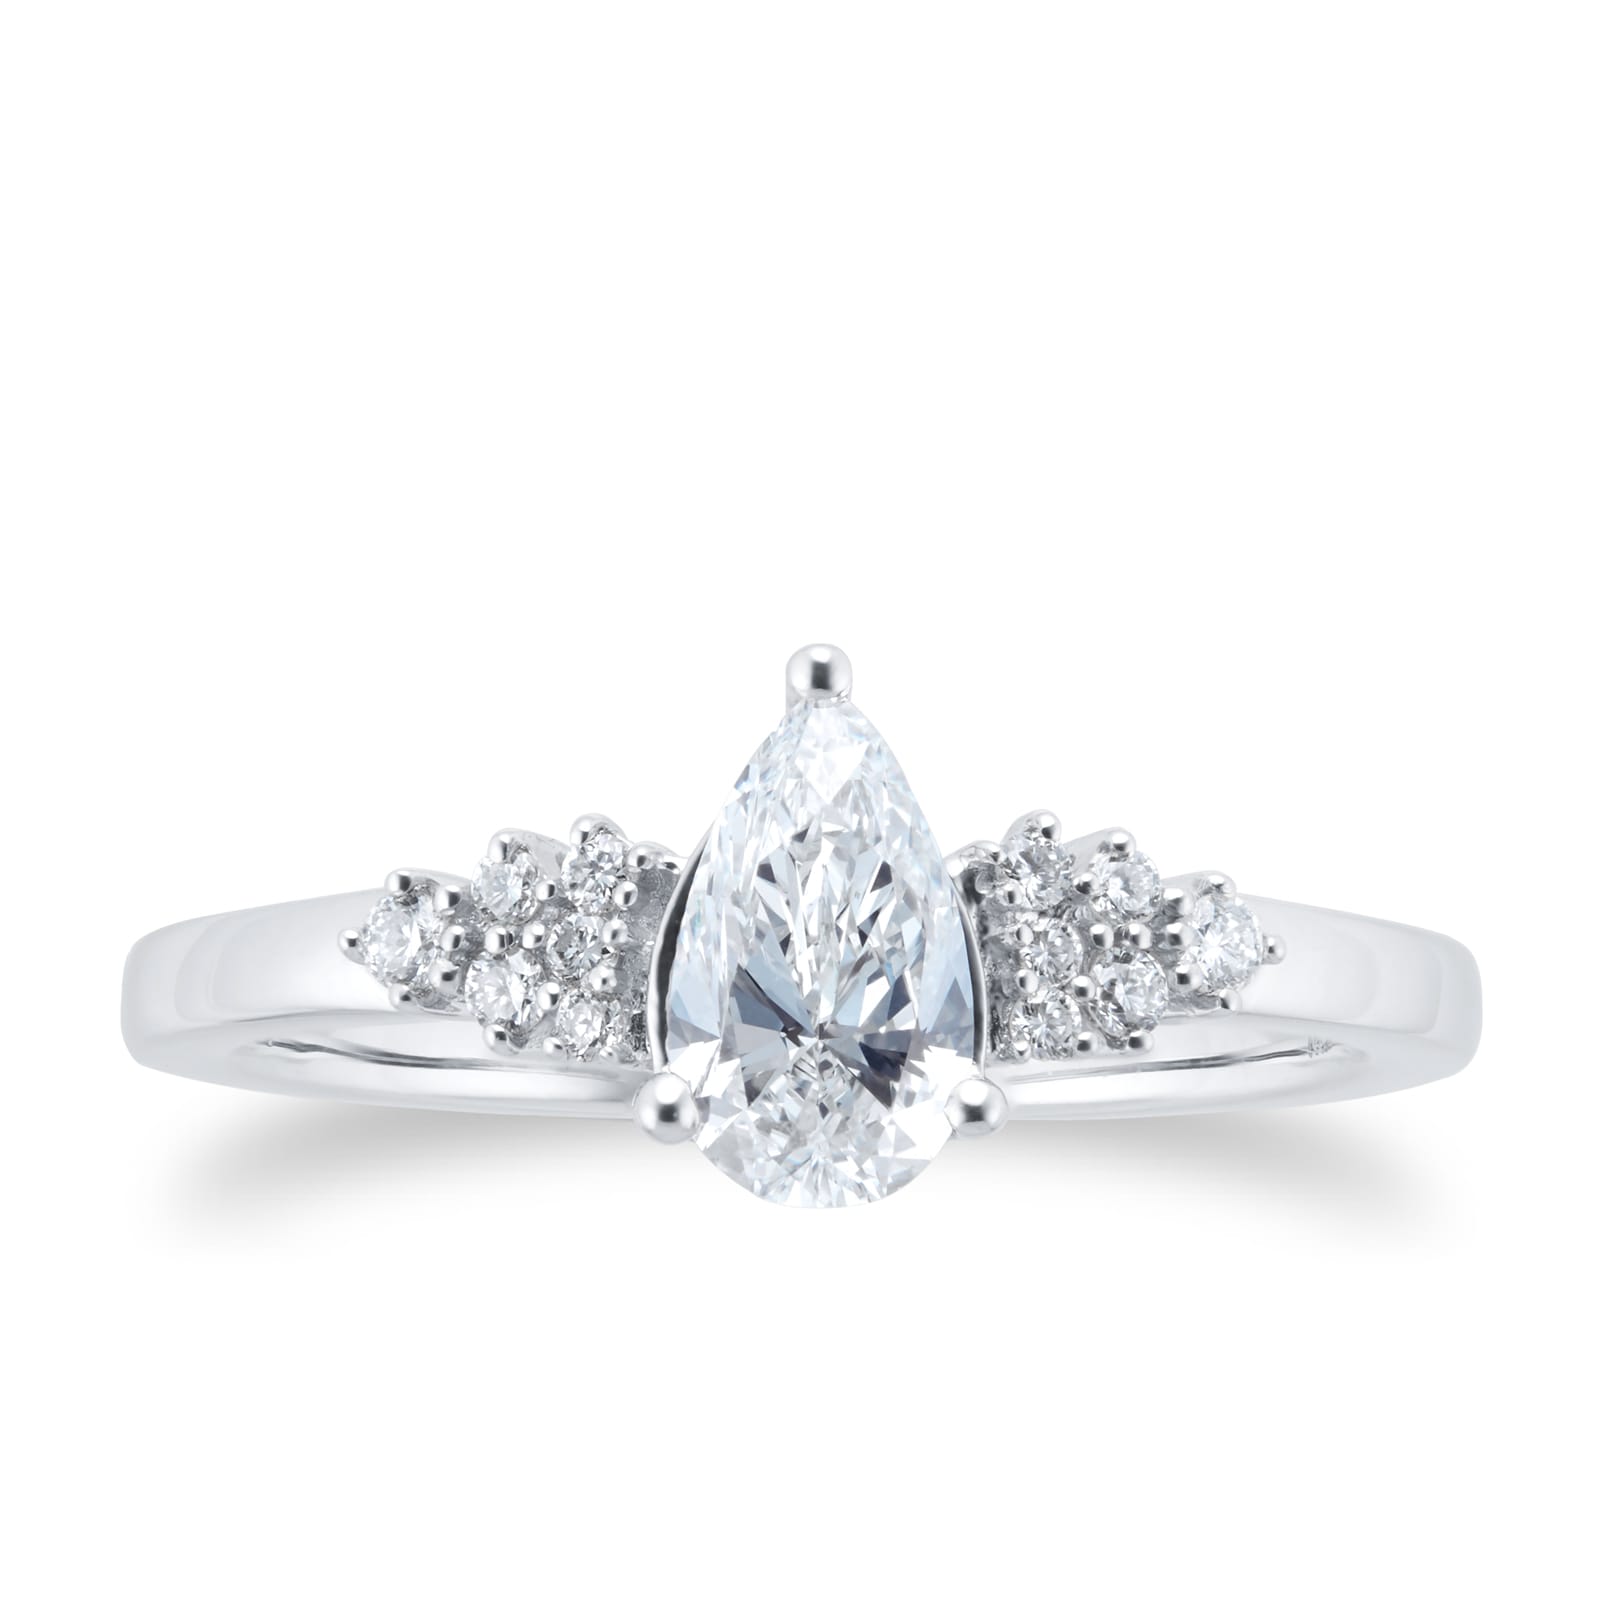 Platinum 0.70cttw Diamond Pear Scatter Engagement Ring - Ring Size M